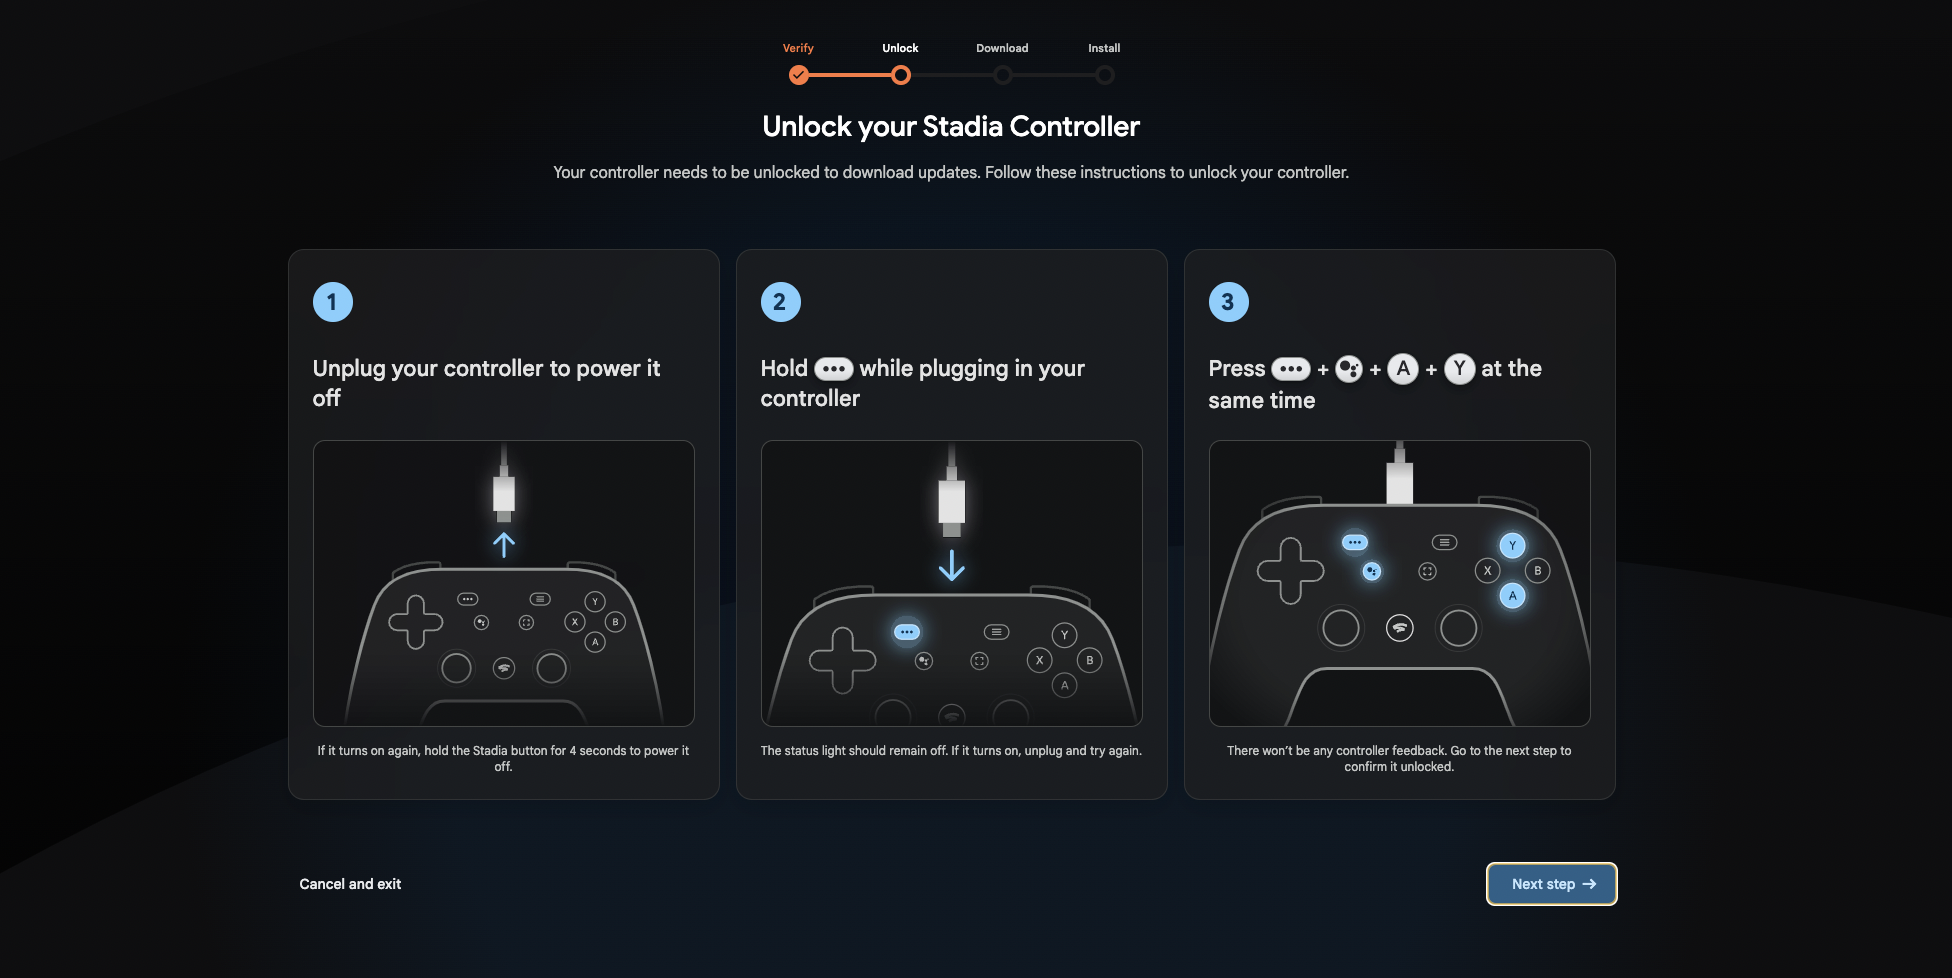 Steps showing how to unlock the Stadia controller to enable firmware updates: Unplug the controller, hold the Options button while plugging it back in, and press Options + Assistant + A + Y at the same time to enable the mode.